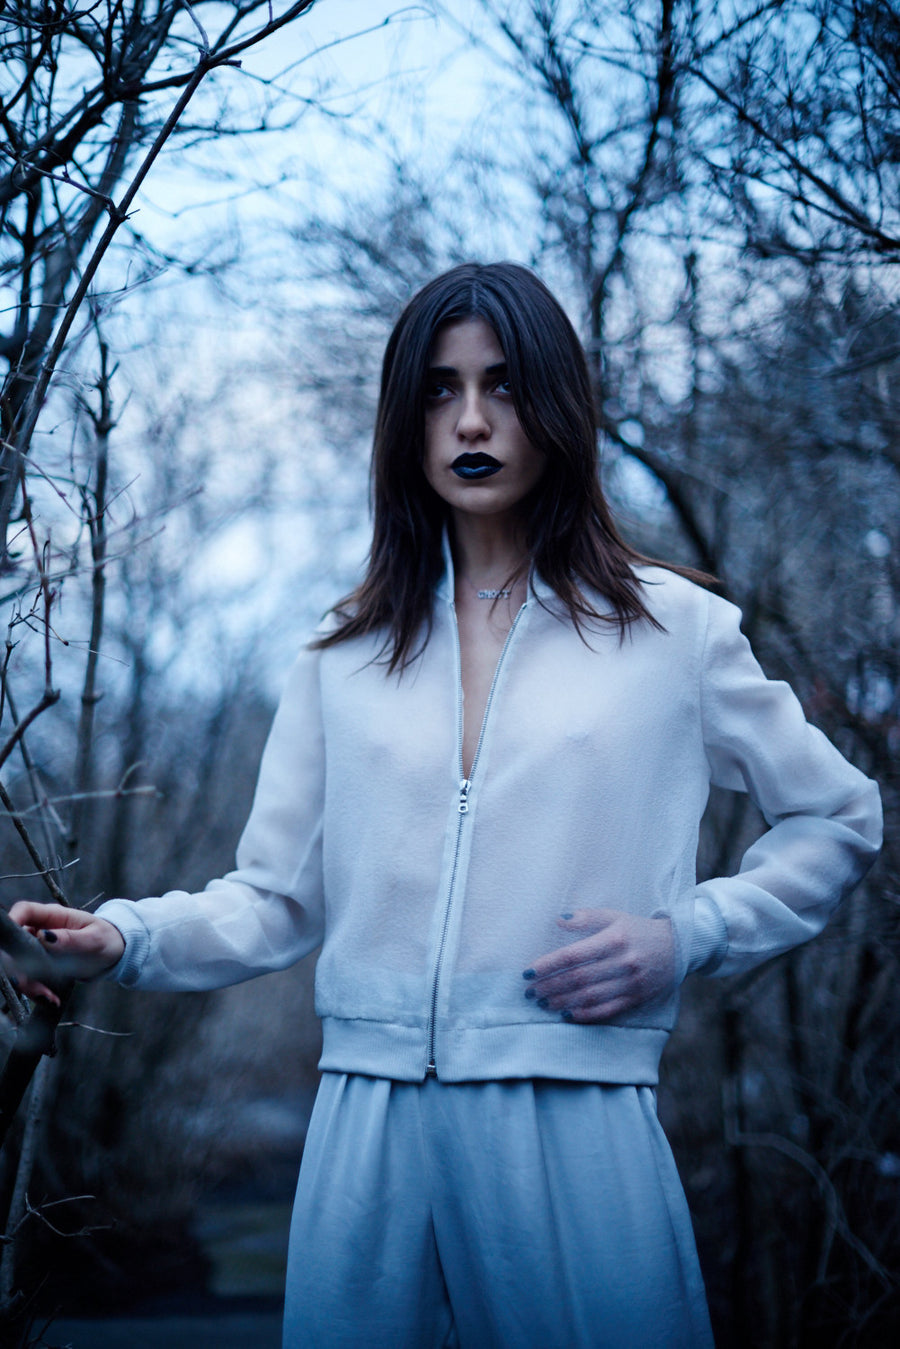 Vanessa M. IMG Model Wendy Nichol Clothing Designer Made to Order Custom Tailoring Made to Measure Handmade in NYC New York City Fashion Runway Show AW16 13 Incarnations White Sheer Silk Club Bomber Jacket w. White Ghost & White Silver Gray Grey Silk Ruche Ankle Pants High Waist Waisted Skinny pajama sweatpants 